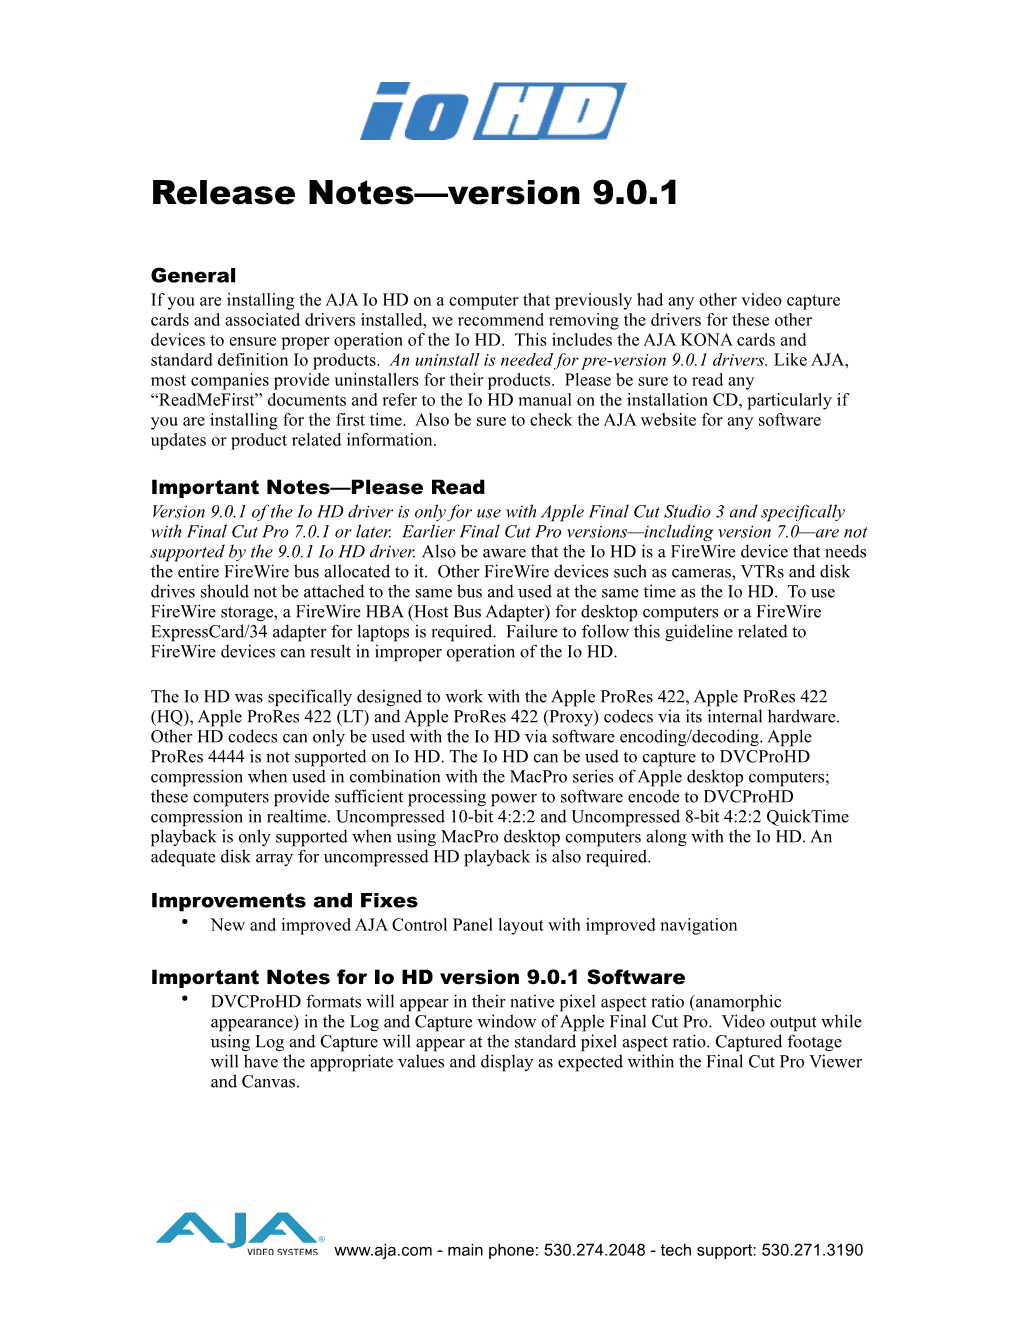 Release Notes—Version 9.0.1